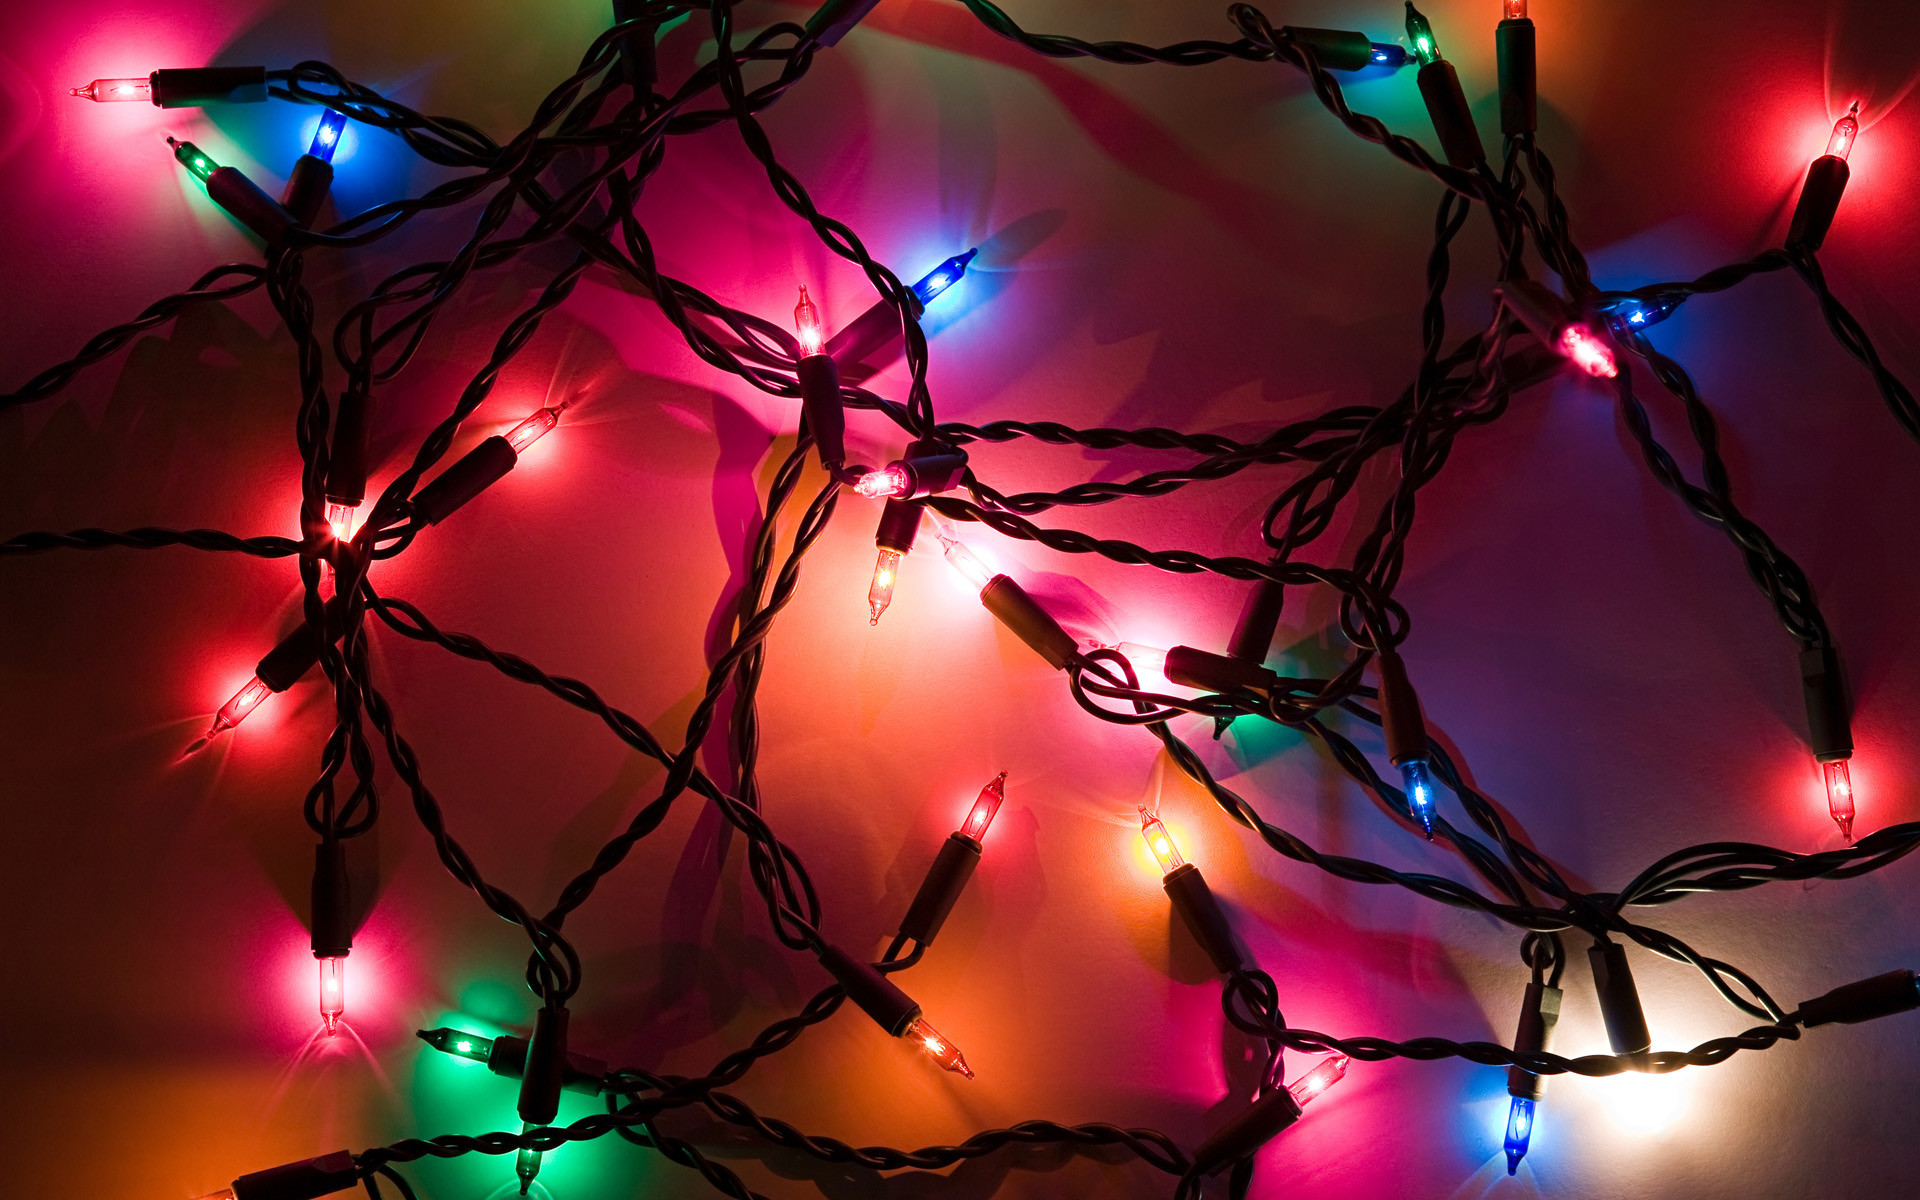 1920x1200 Related Desktop Backgrounds. Christmas Holiday Lights